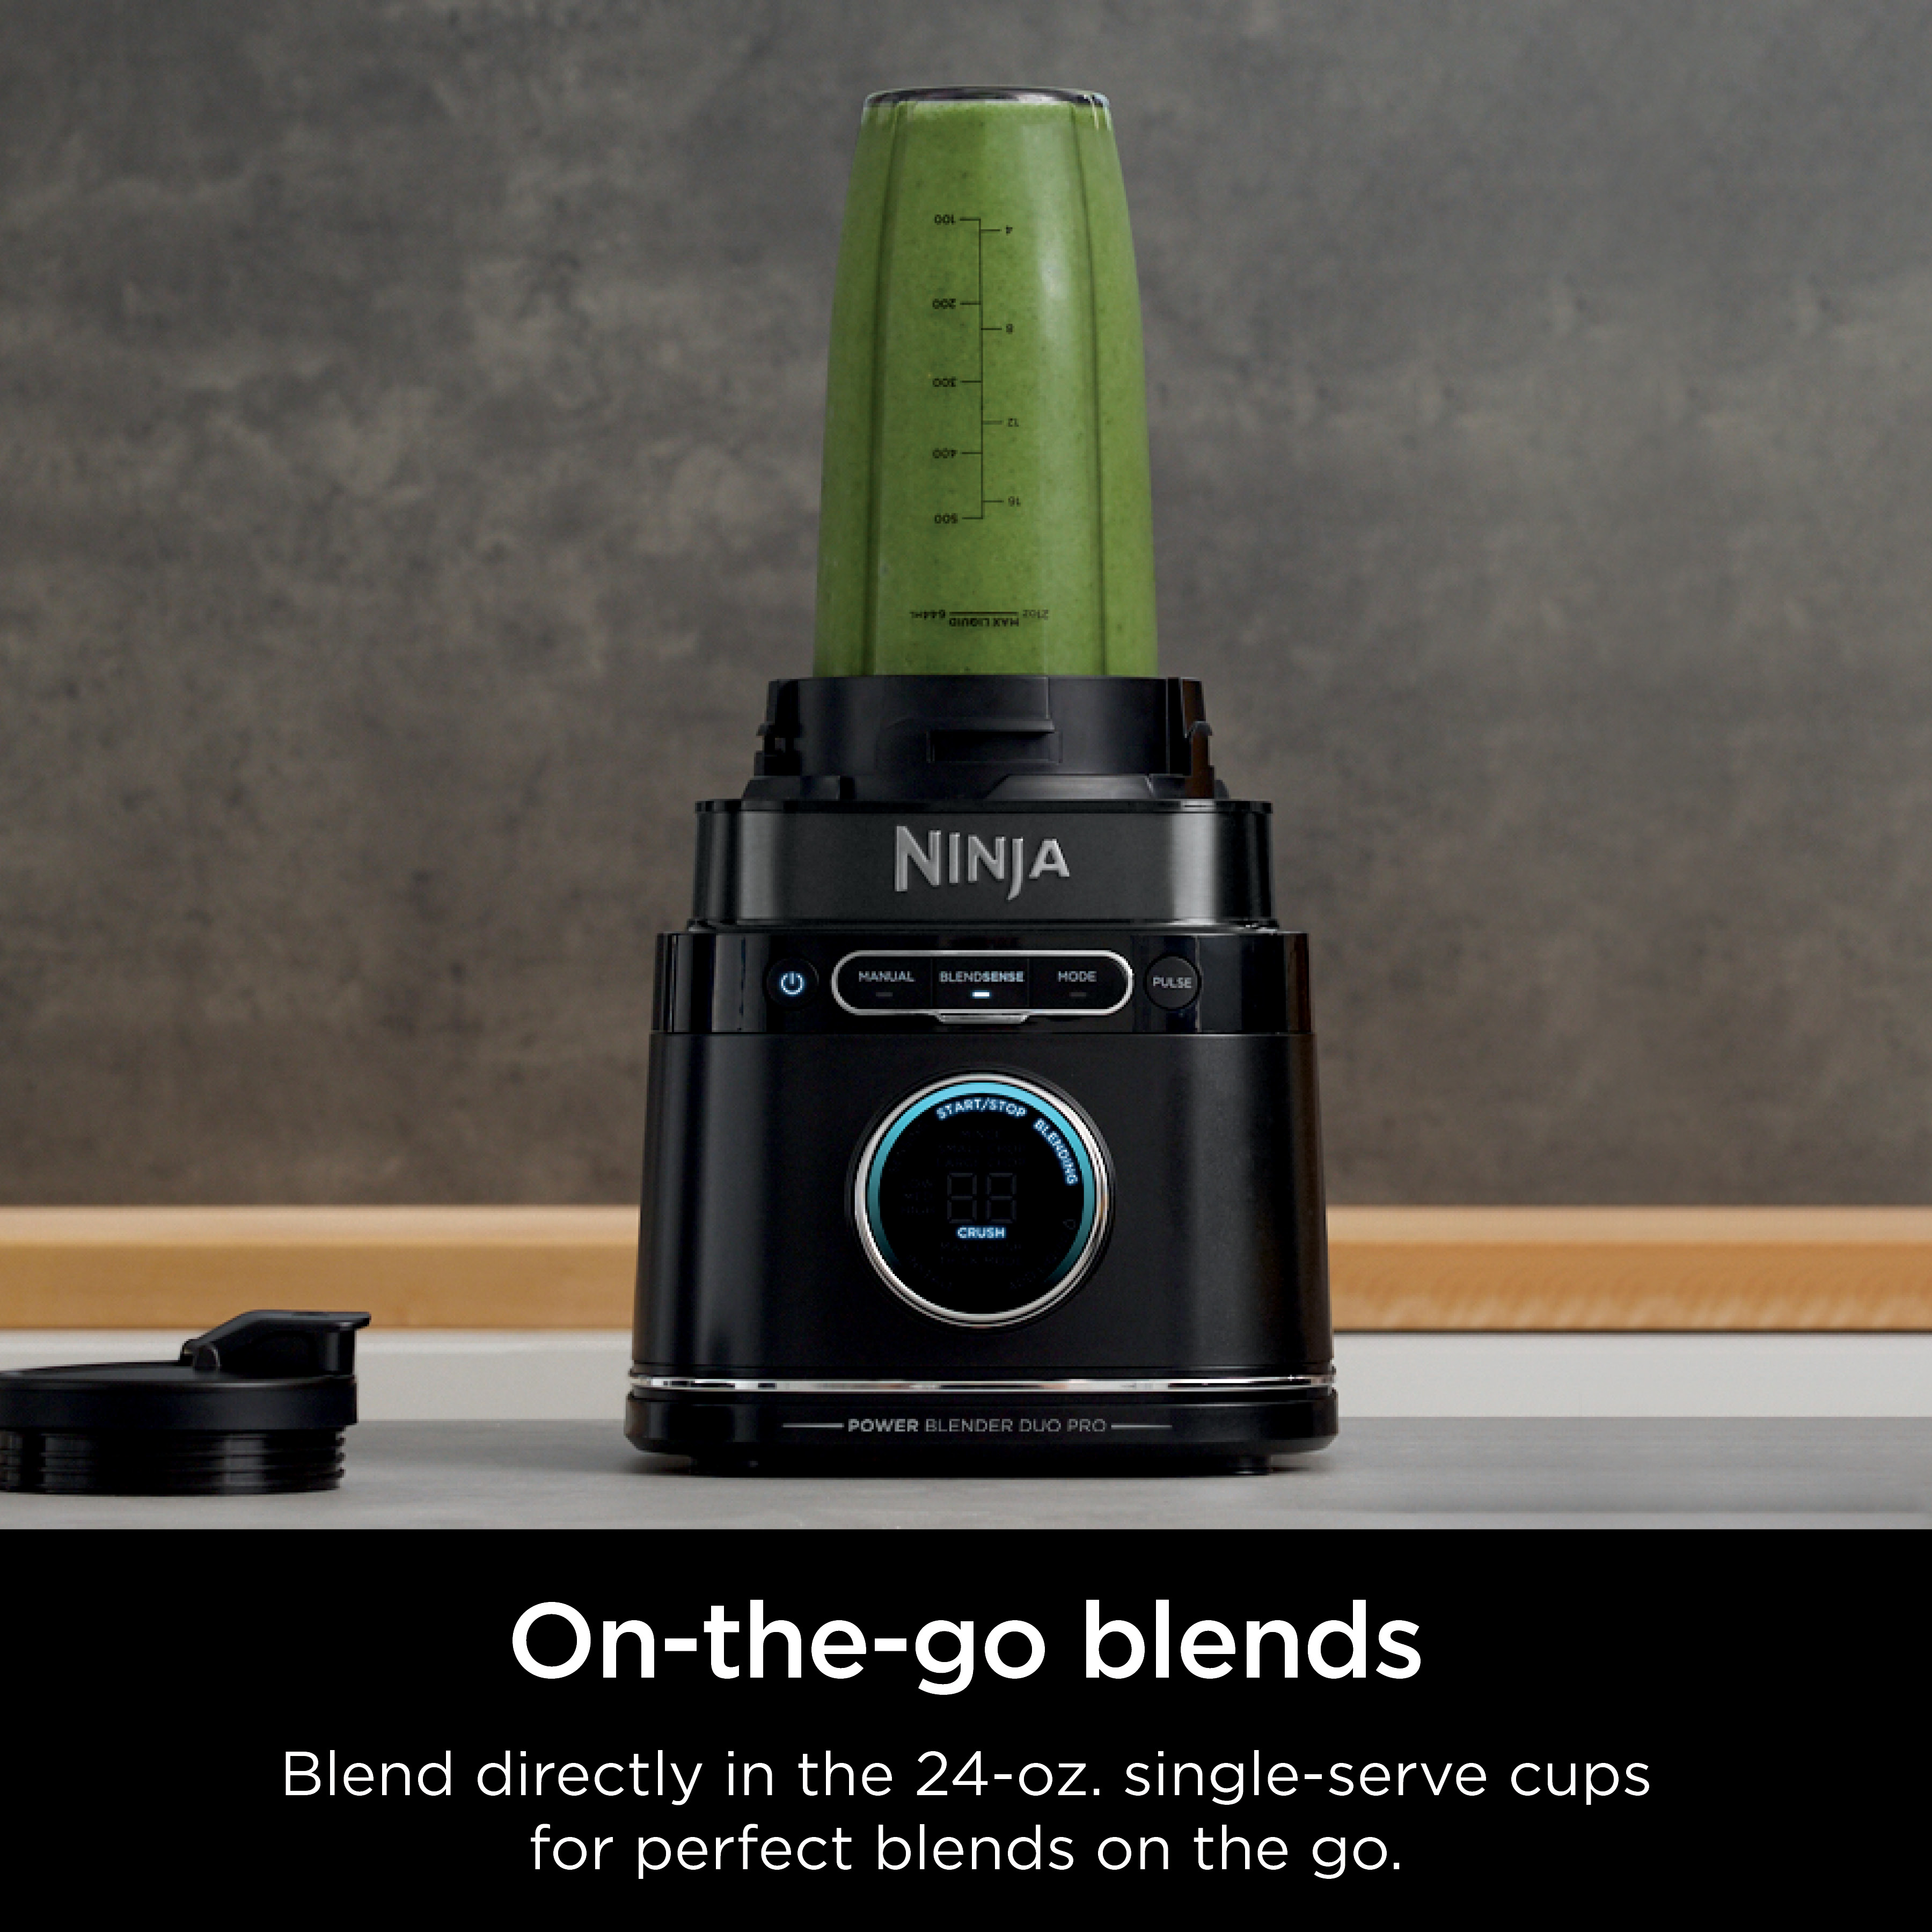 Ninja® Professional Plus Blender with Auto-iQ® and 72-oz.* Total